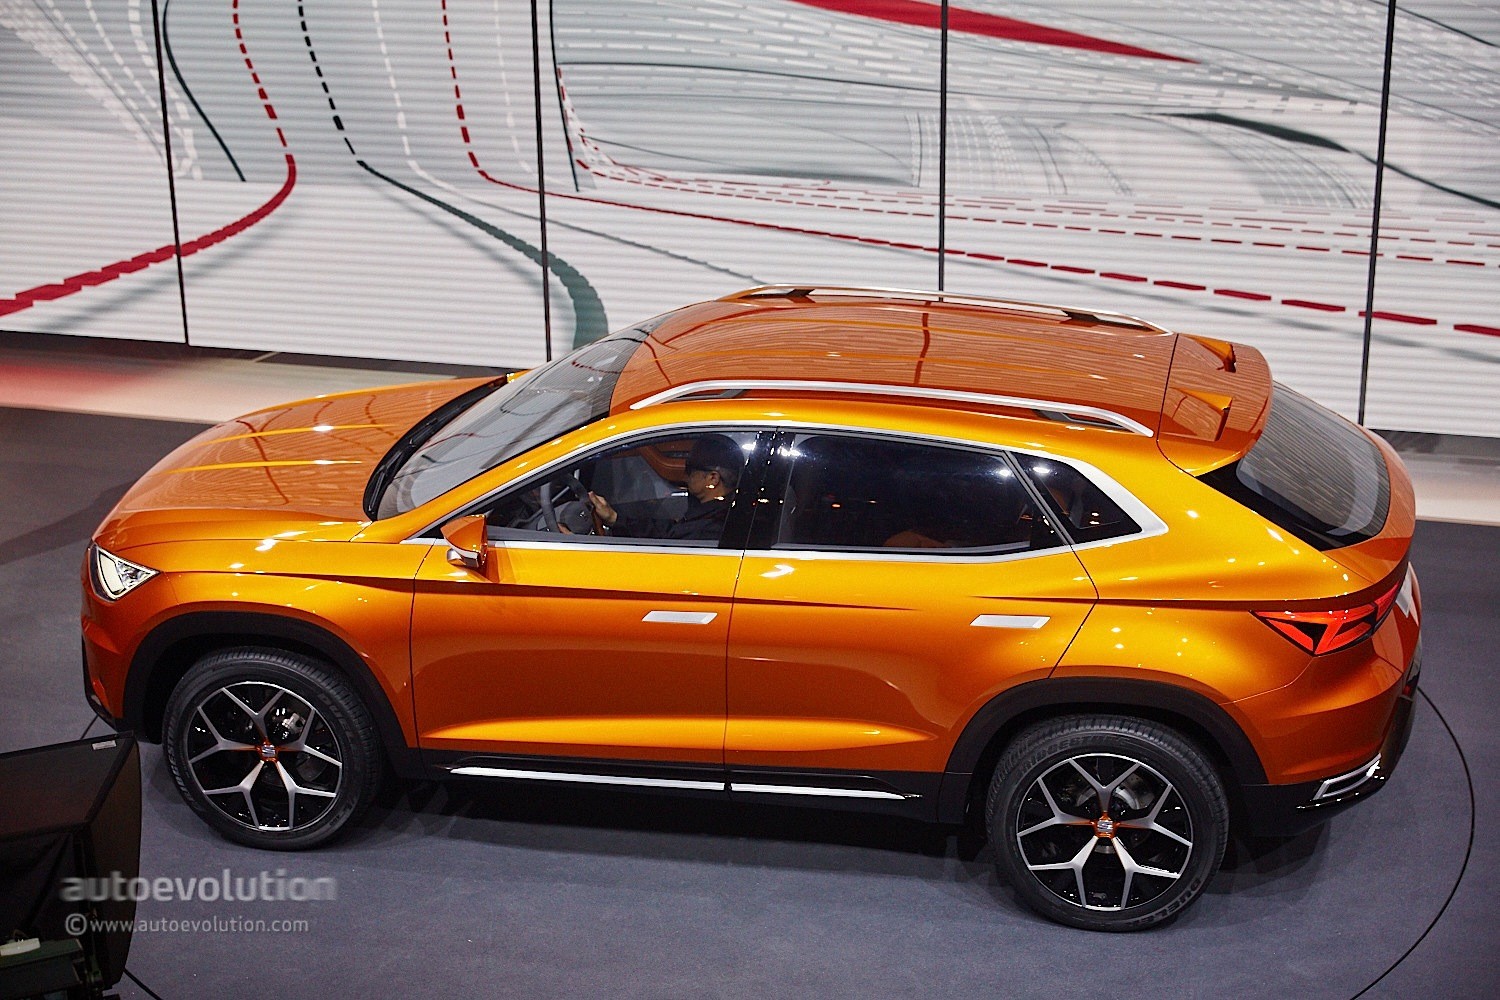 2020 SEAT SUV-Coupe Reportedly Confirmed For Production - autoevolution